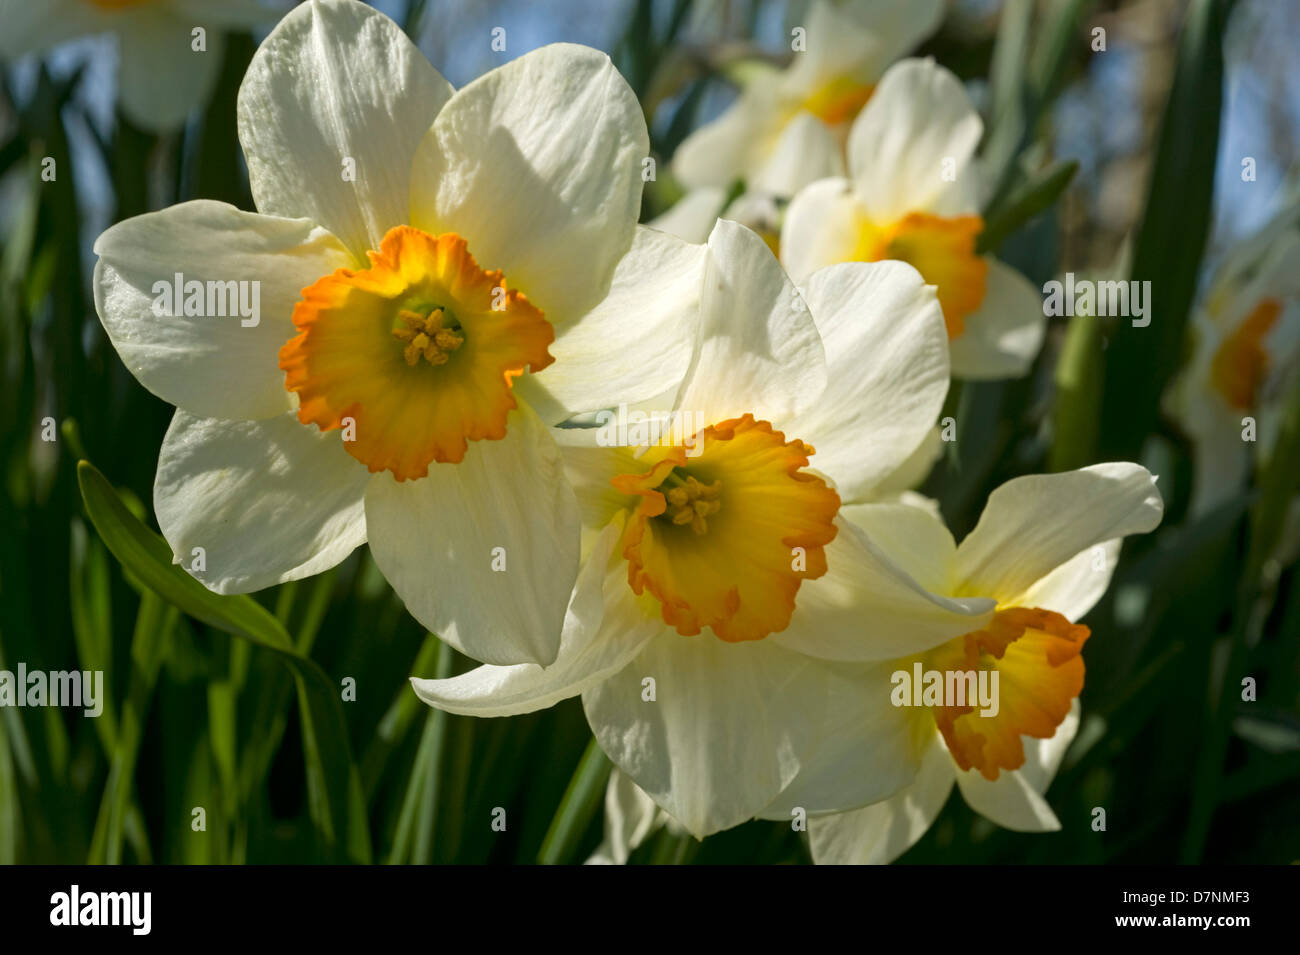 Large cupped Narcissus with two toned orange corona and pale yellow petals by woodland in springtime Stock Photo